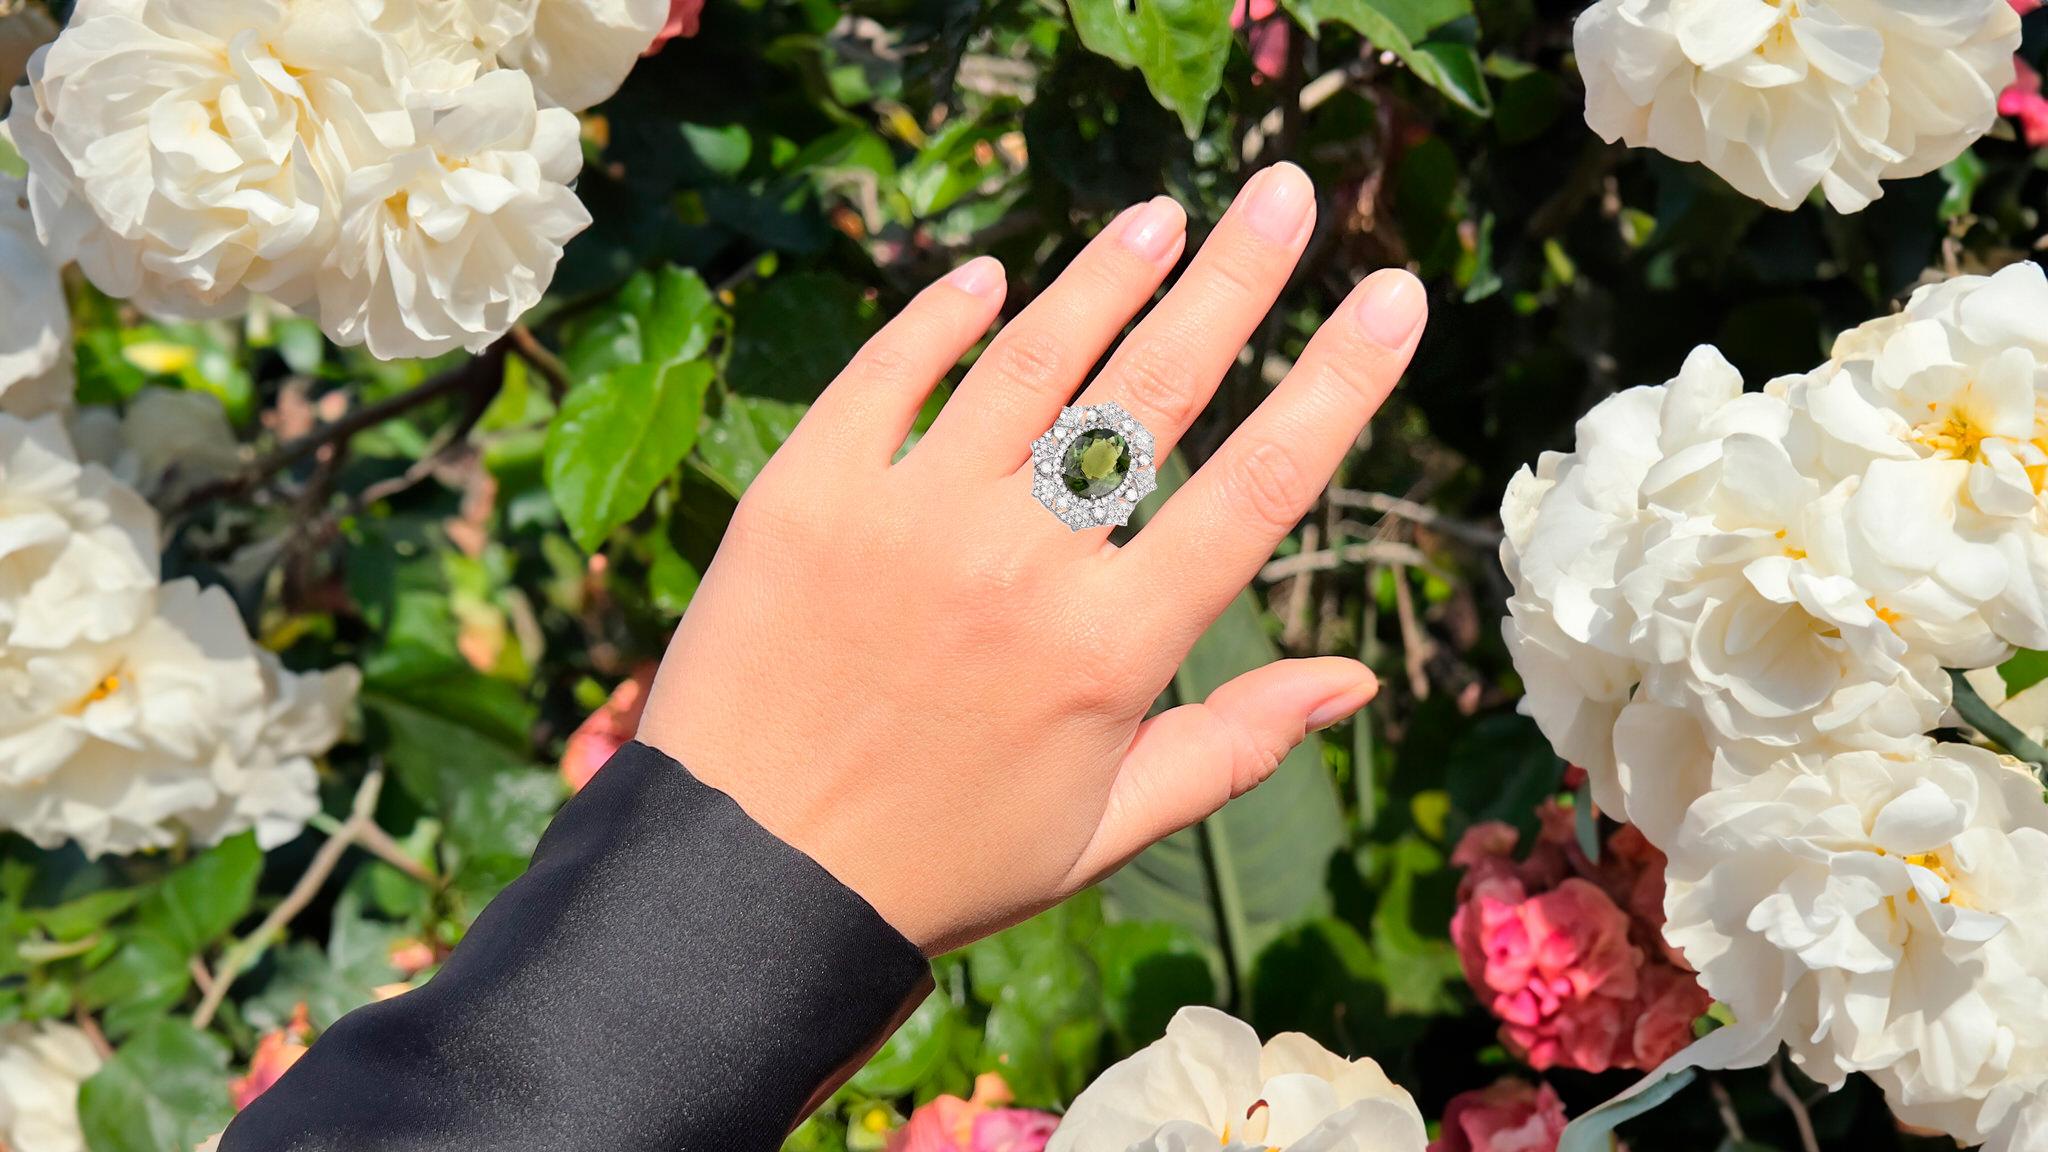 It comes with the Gemological Appraisal by GIA GG/AJP
All Gemstones are Natural
Green Tourmaline = 6.20 Carat
120 Diamonds = 1.45 Carats
Metal: Black Rhodium Plated Sterling Silver
Ring Size: 7.5* US
*It can be resized complimentary